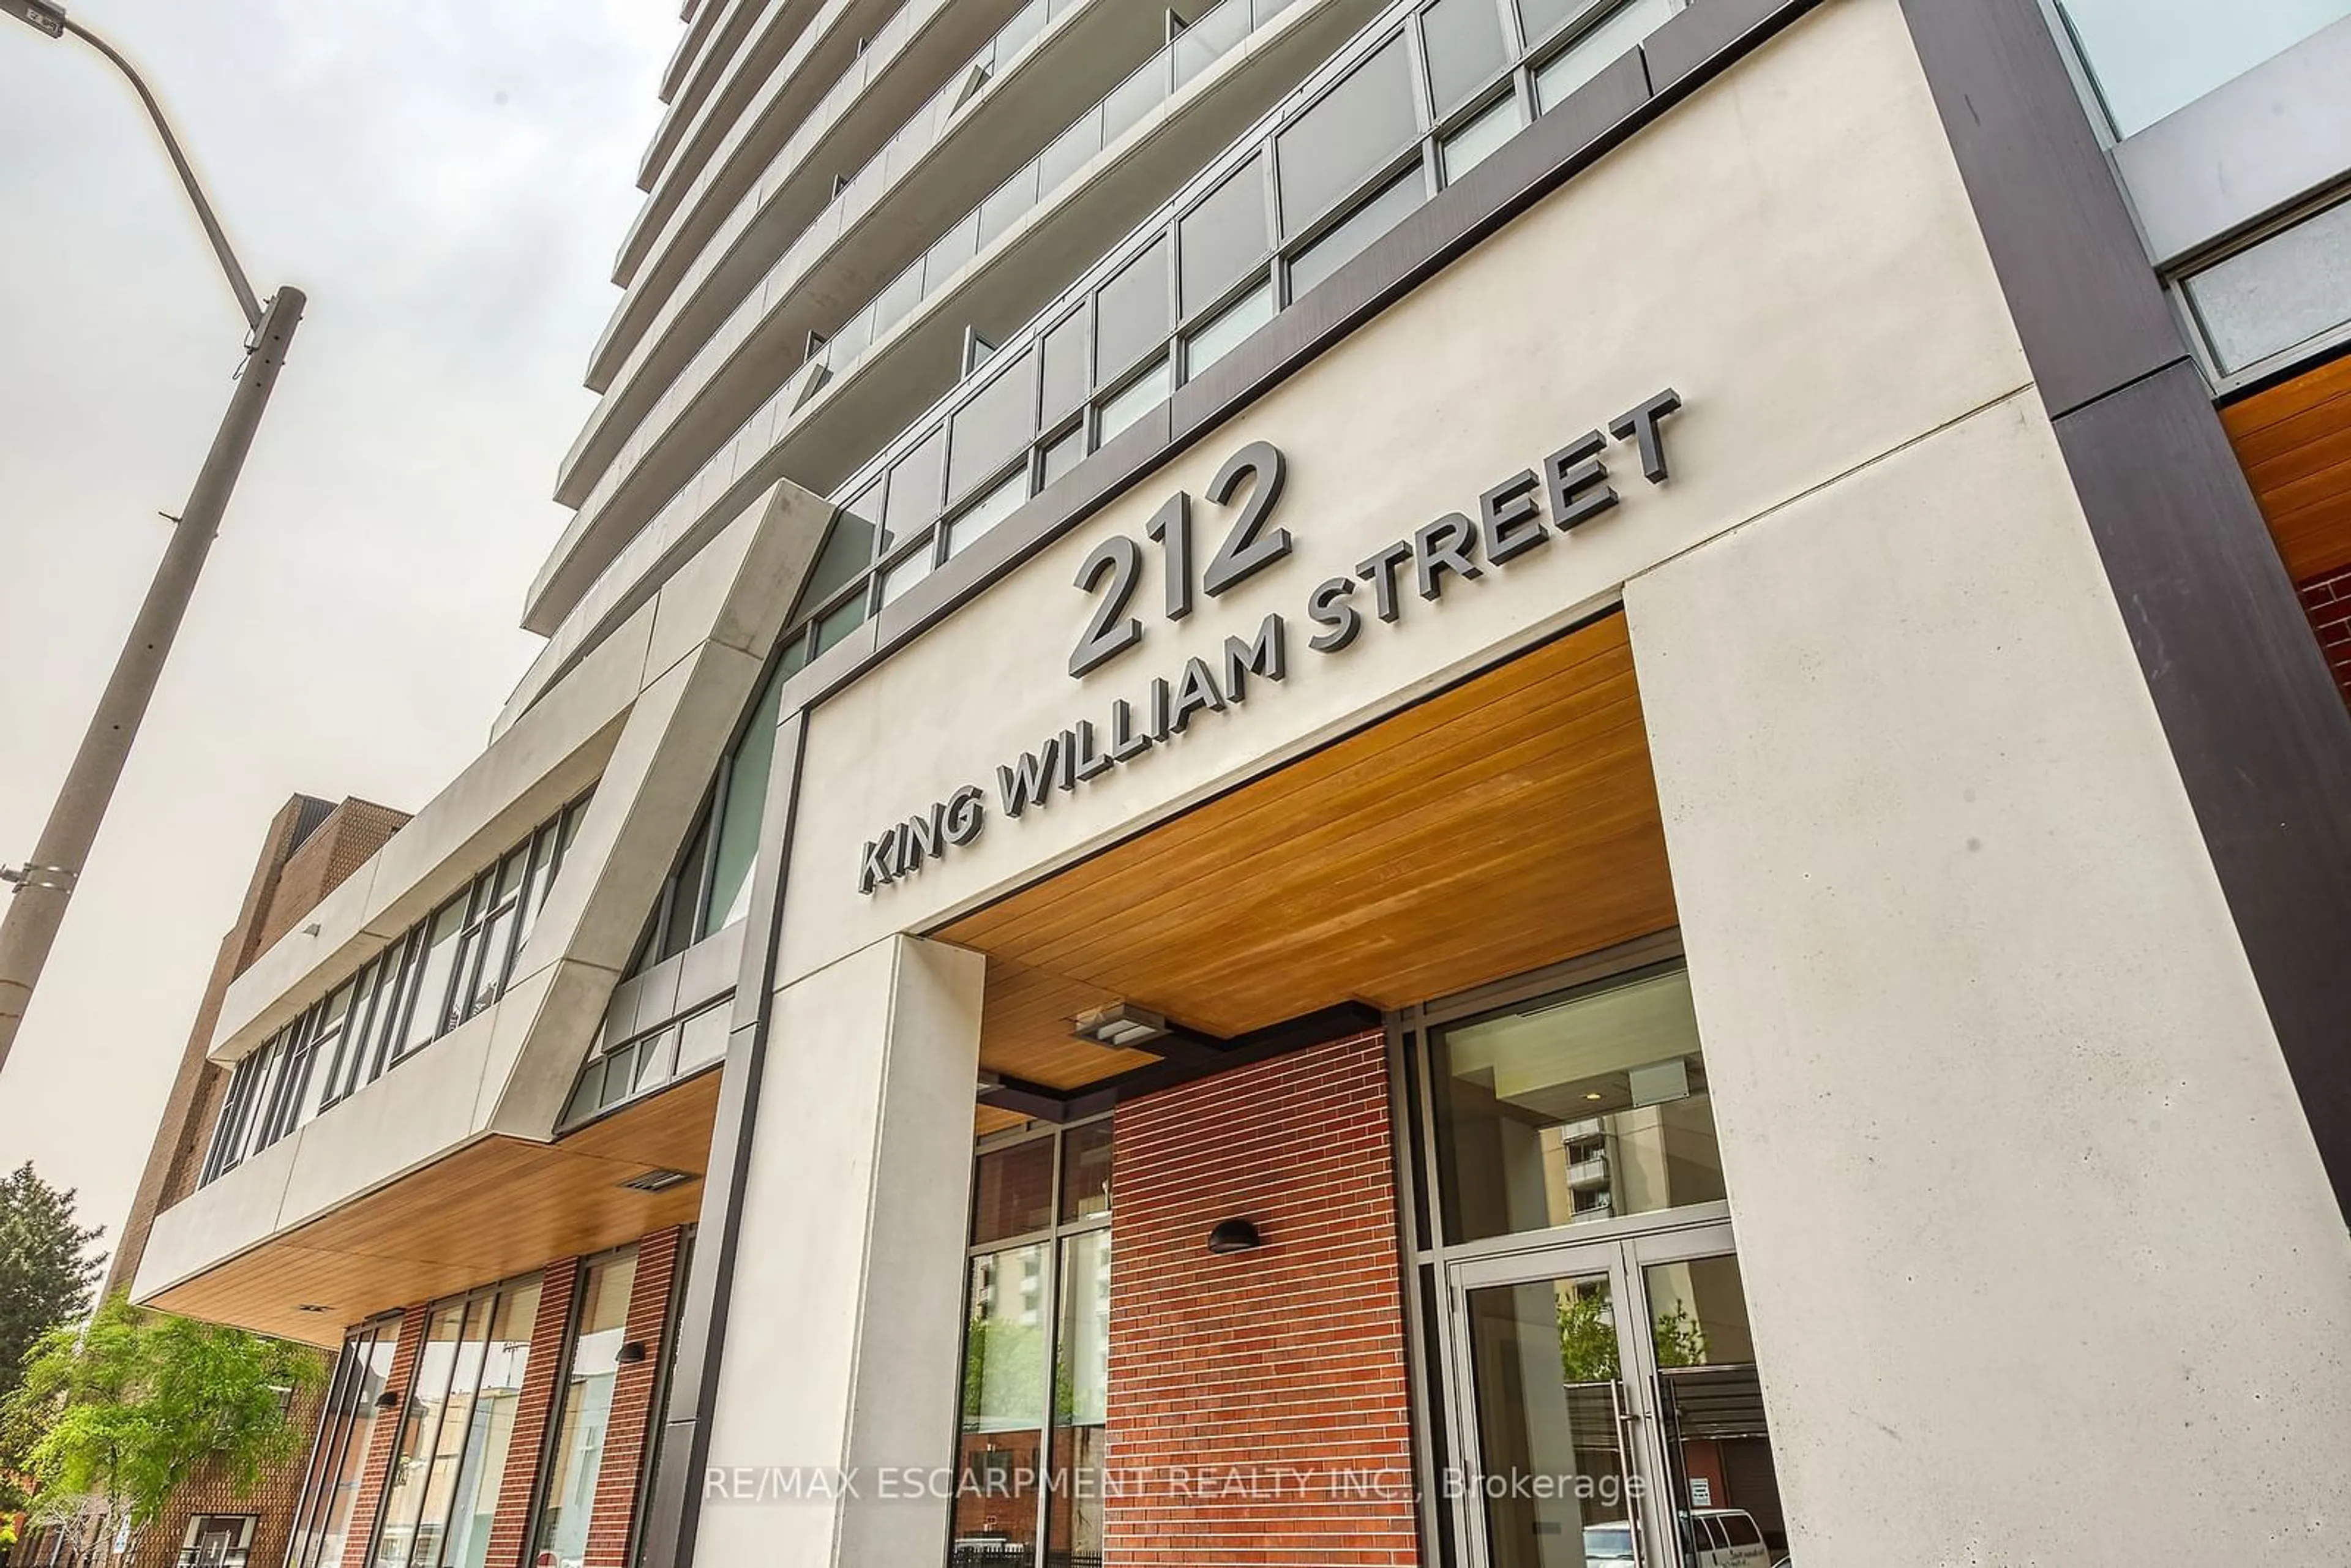 Street view for 212 King William St #805, Hamilton Ontario L8R 0A7